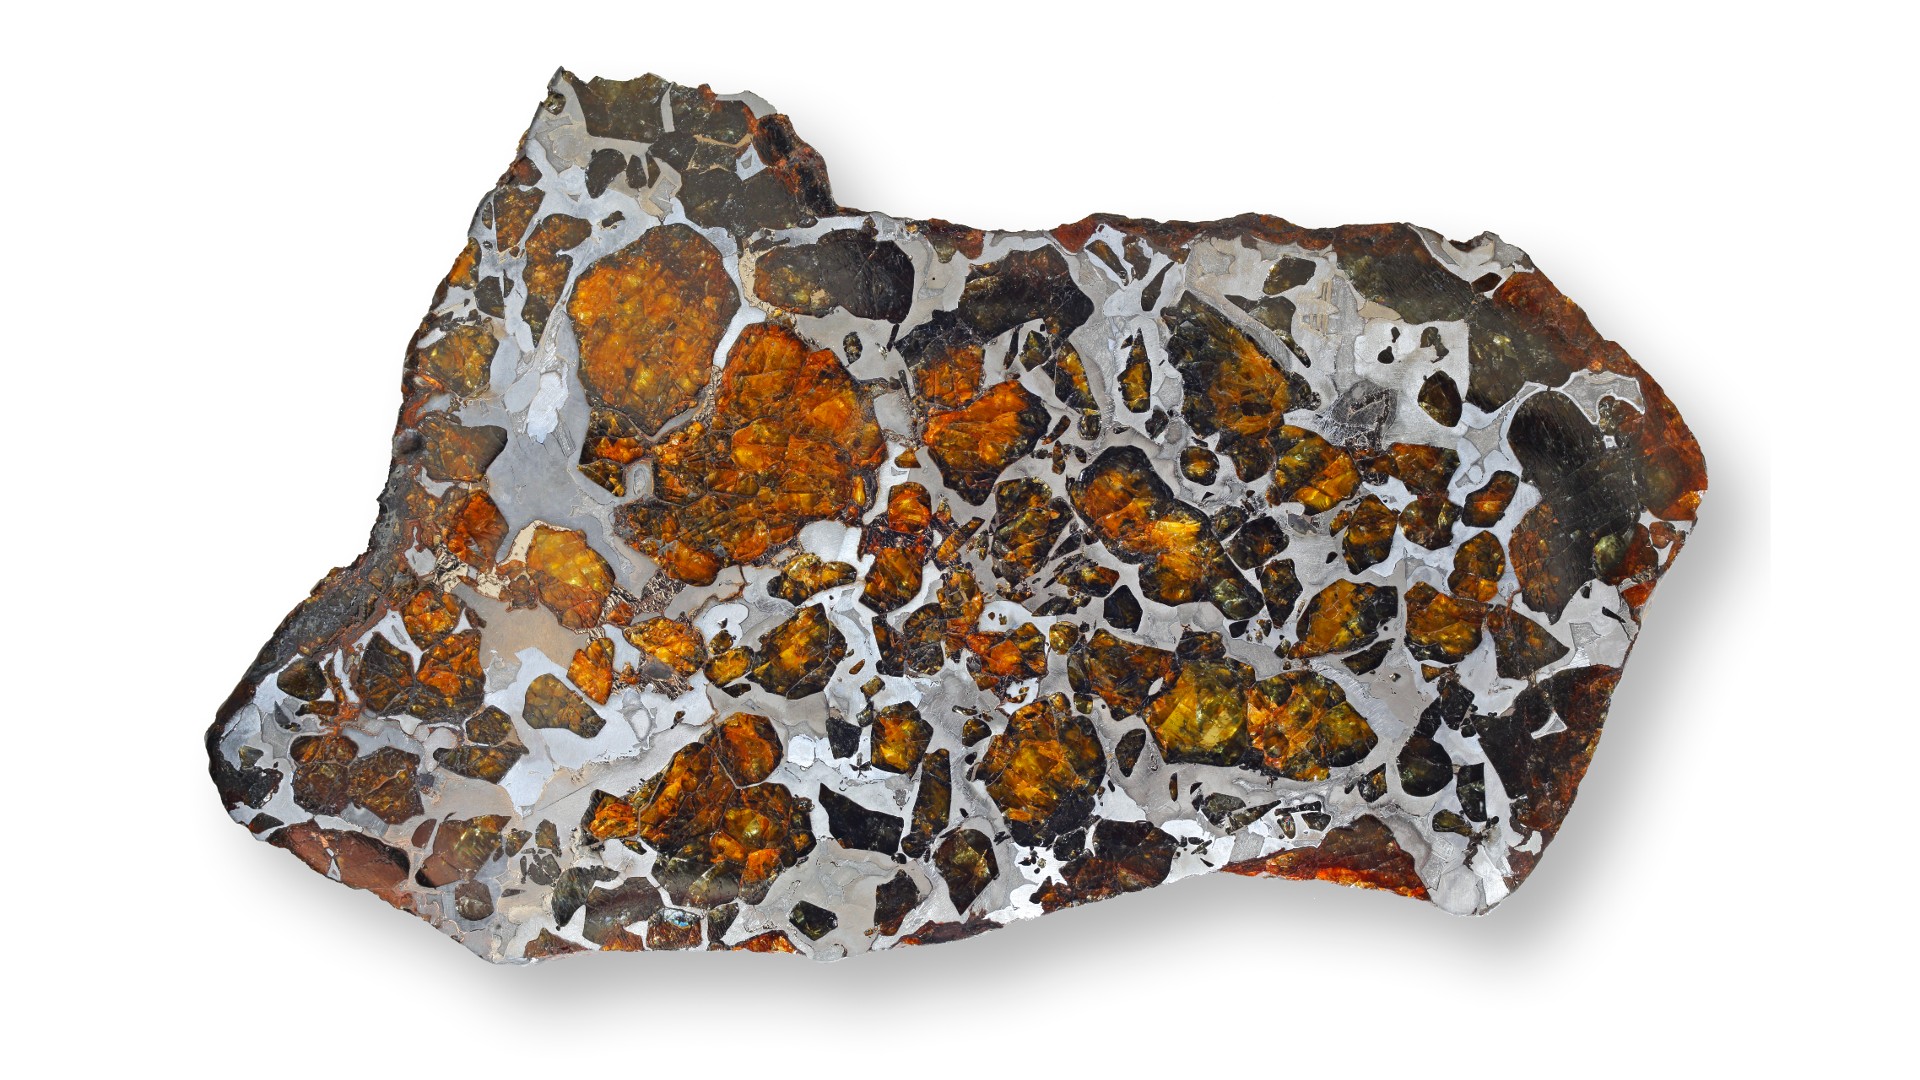 Stone-iron meteorite (Pallasit) with Olivinen and visible Widmanstaetten figures. Size: 15 cm. It has lots of amber colored flecks surrounde by black and then white.